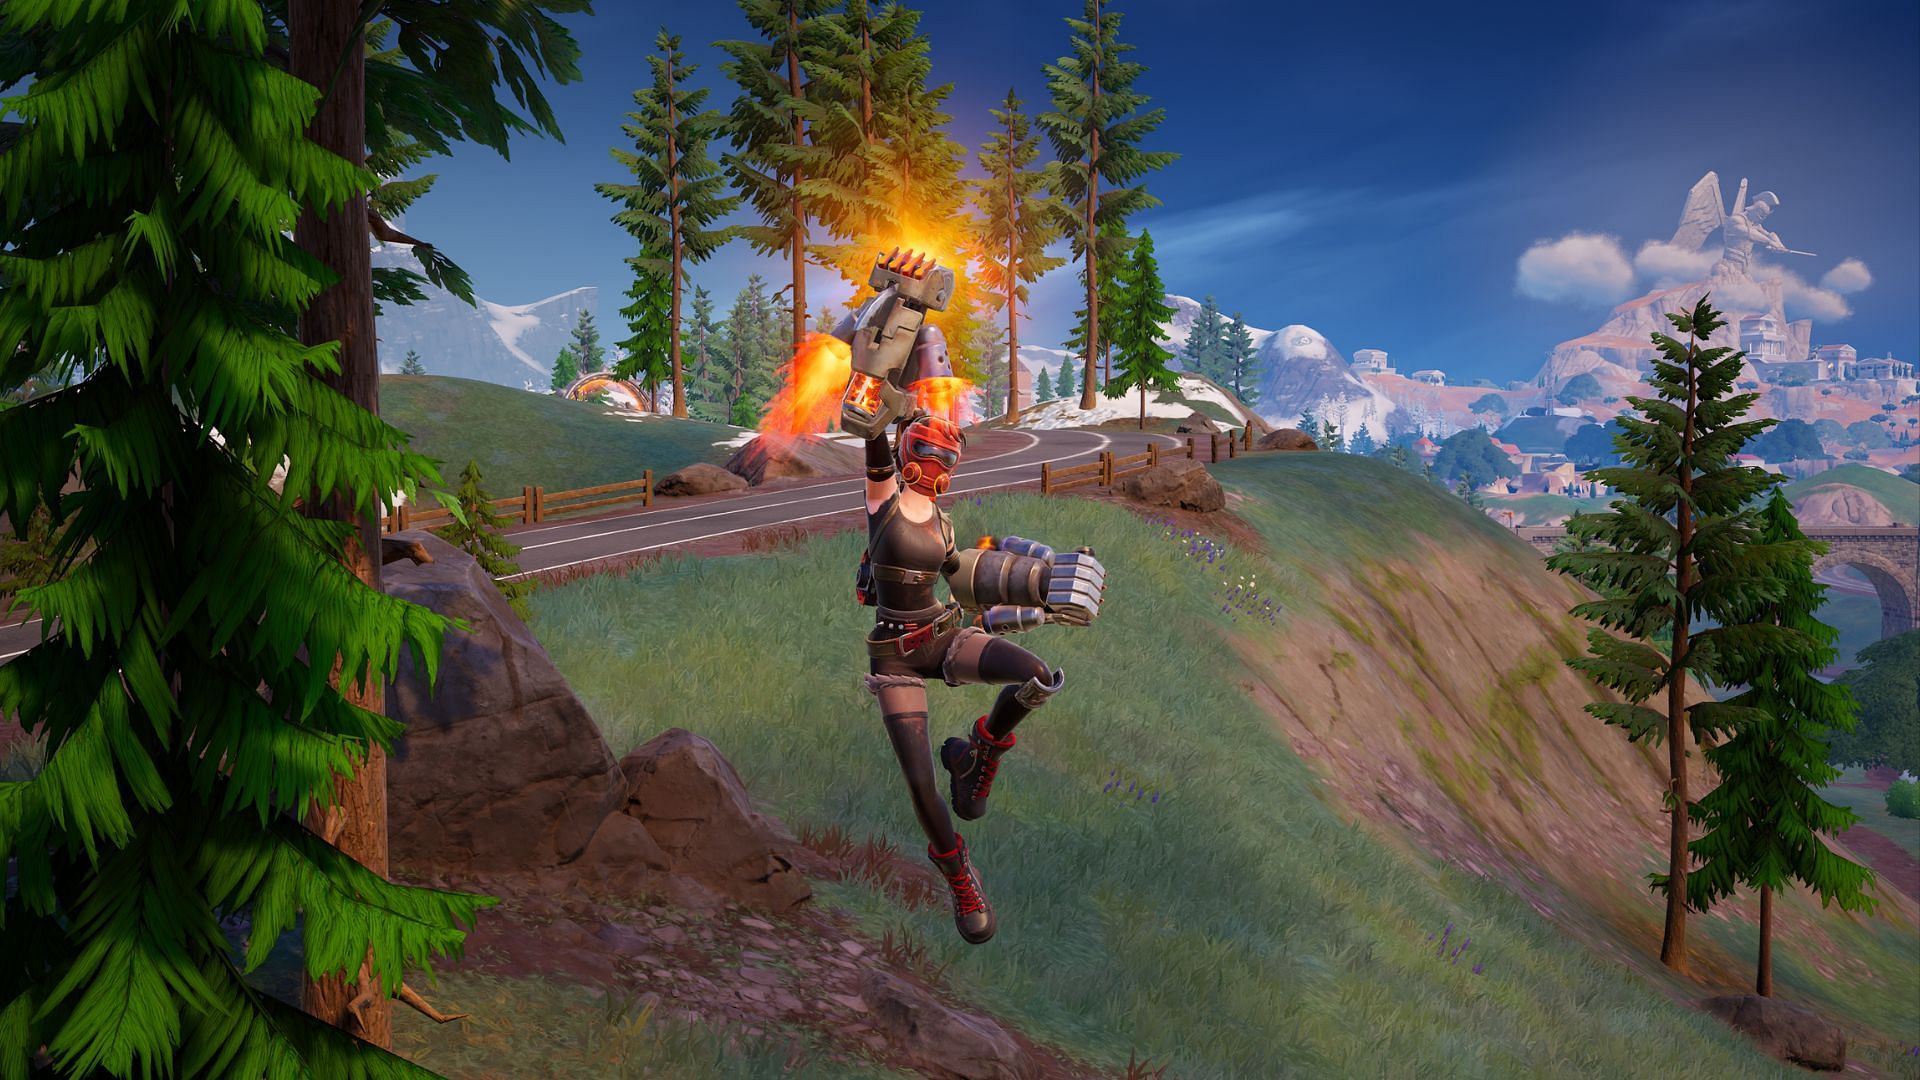 Fortnite leaks hint at melee-only game mode in development